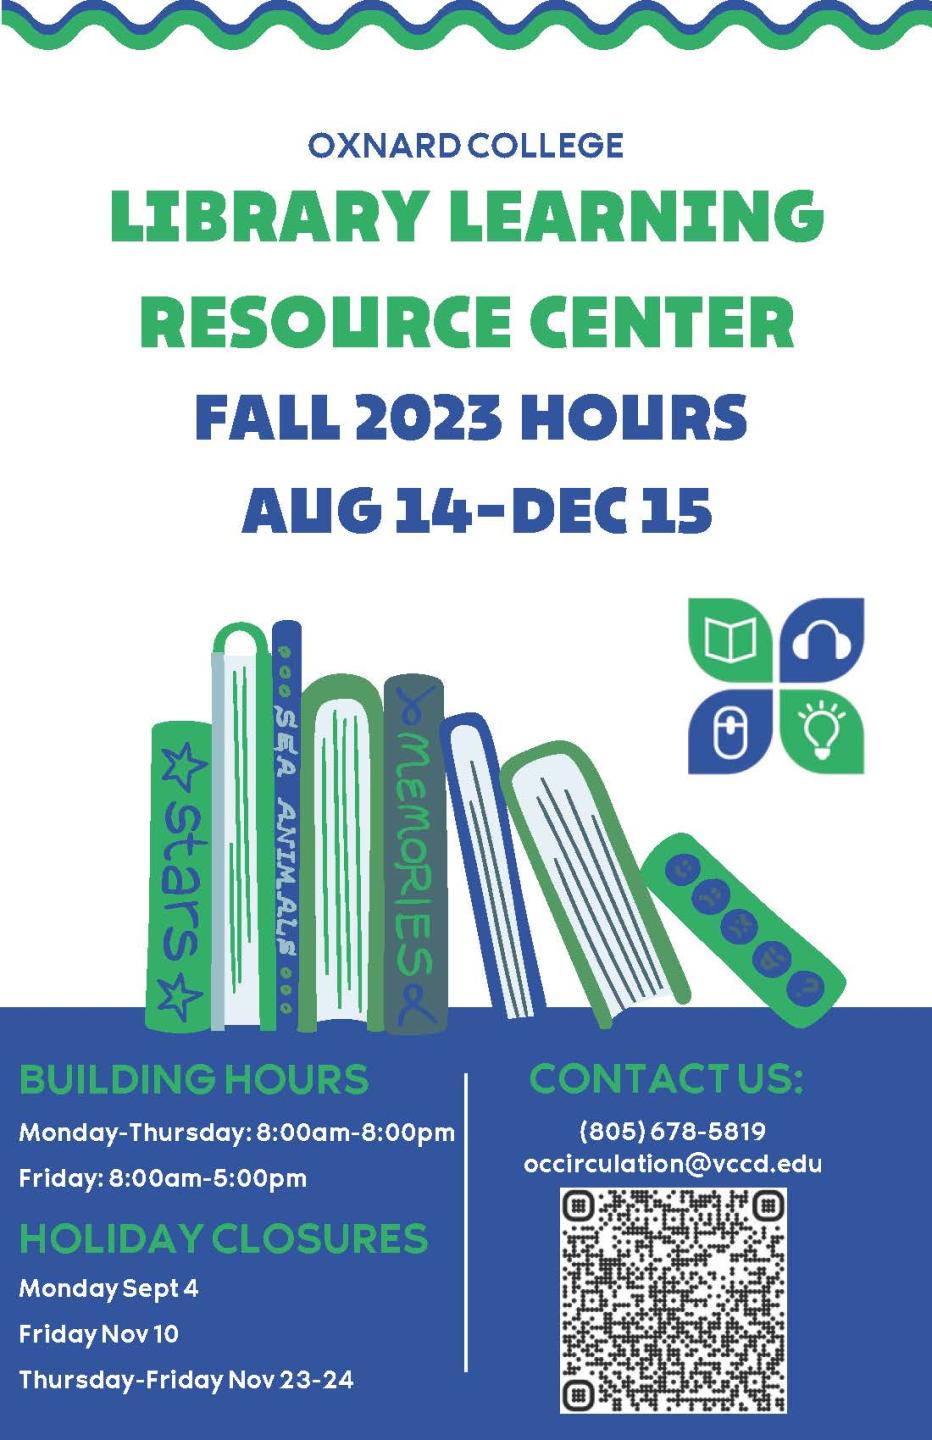 LLRC fall hours